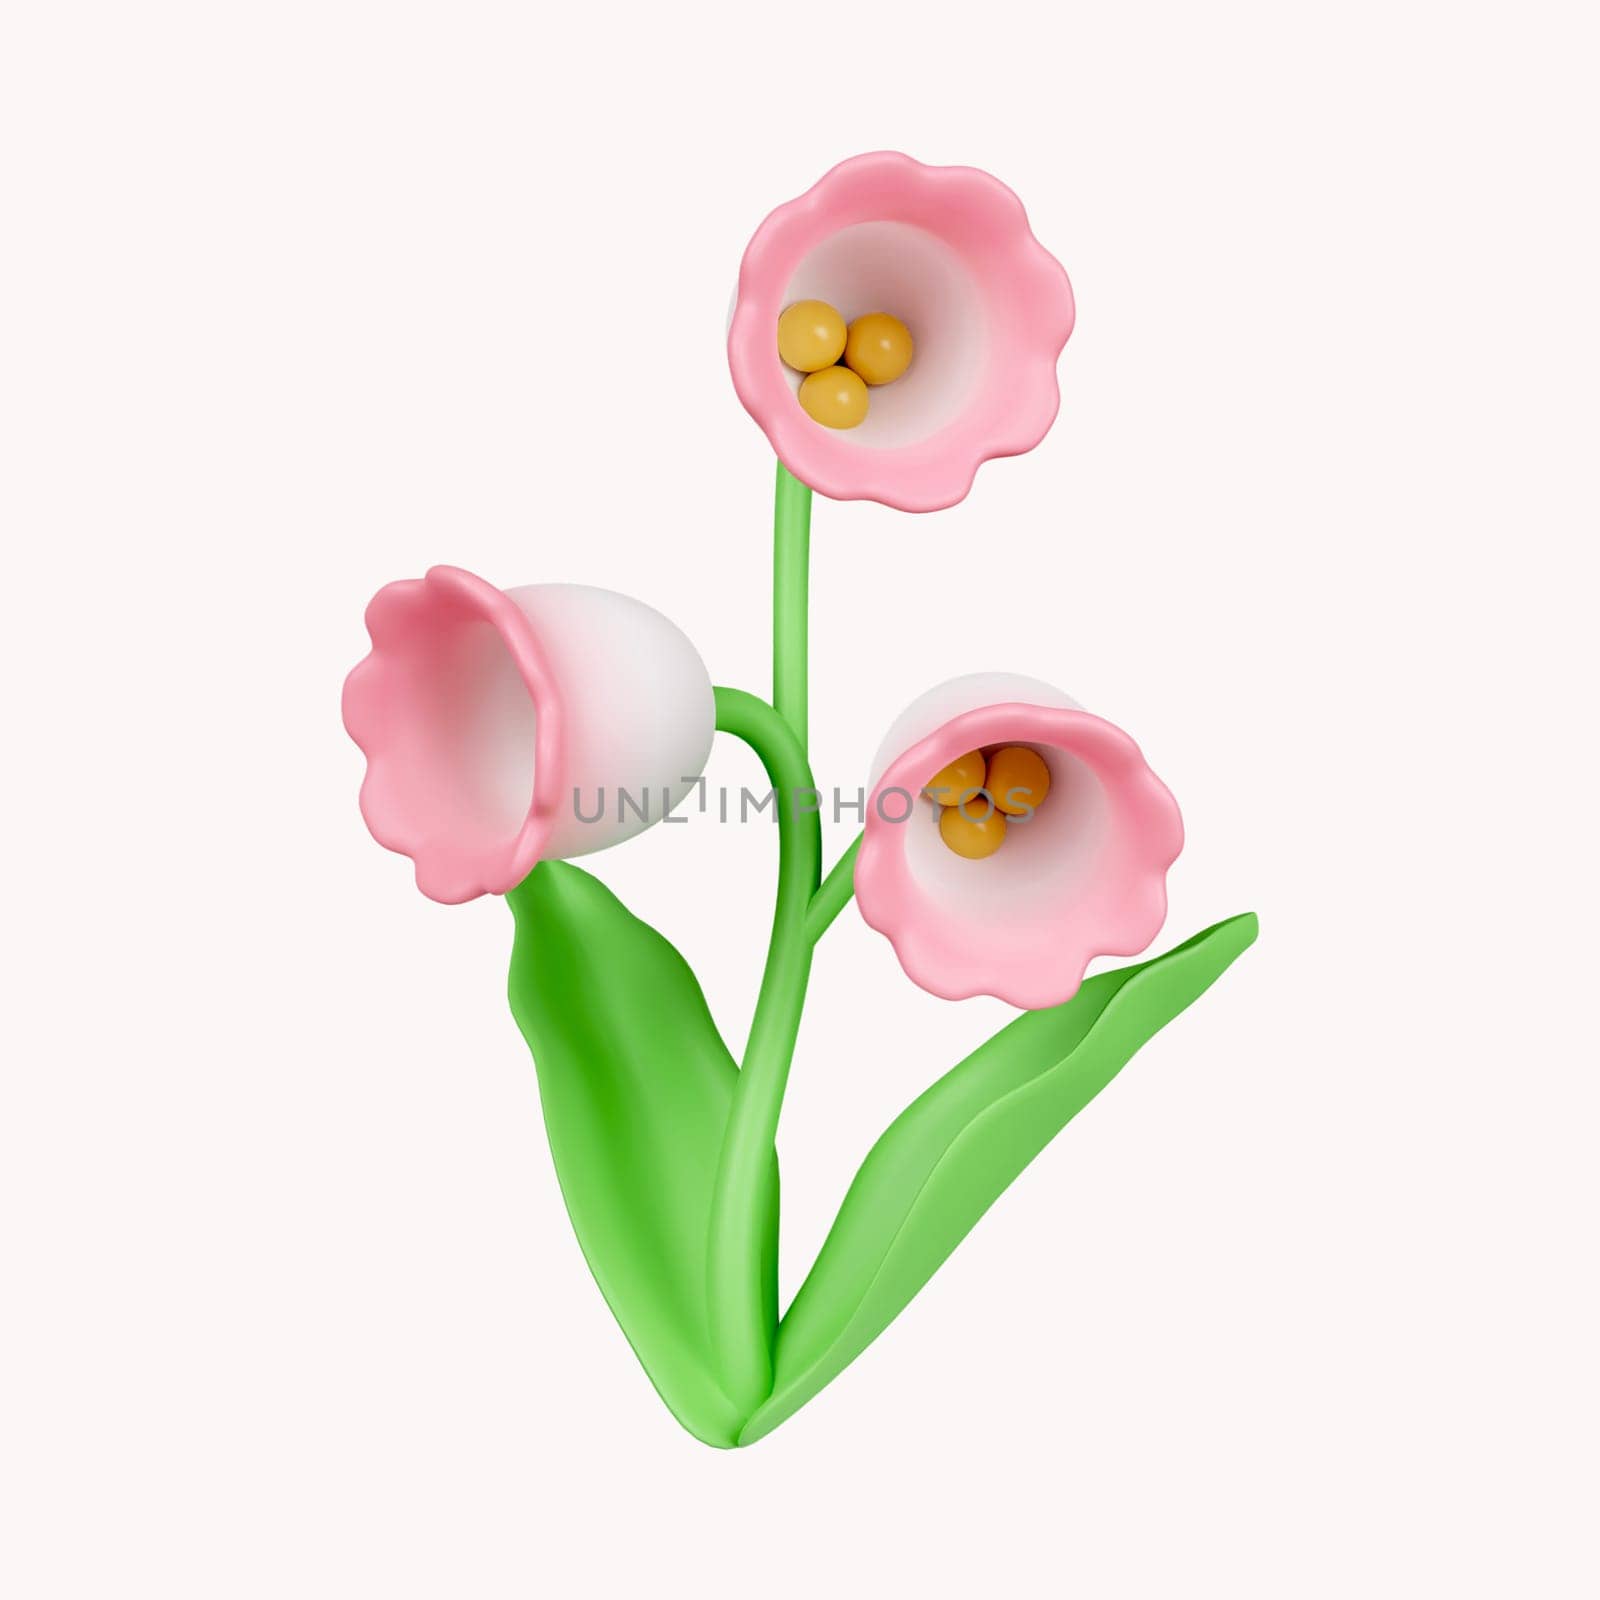 3d Lily of the Valley flower. icon isolated on white background. 3d rendering illustration. Clipping path..